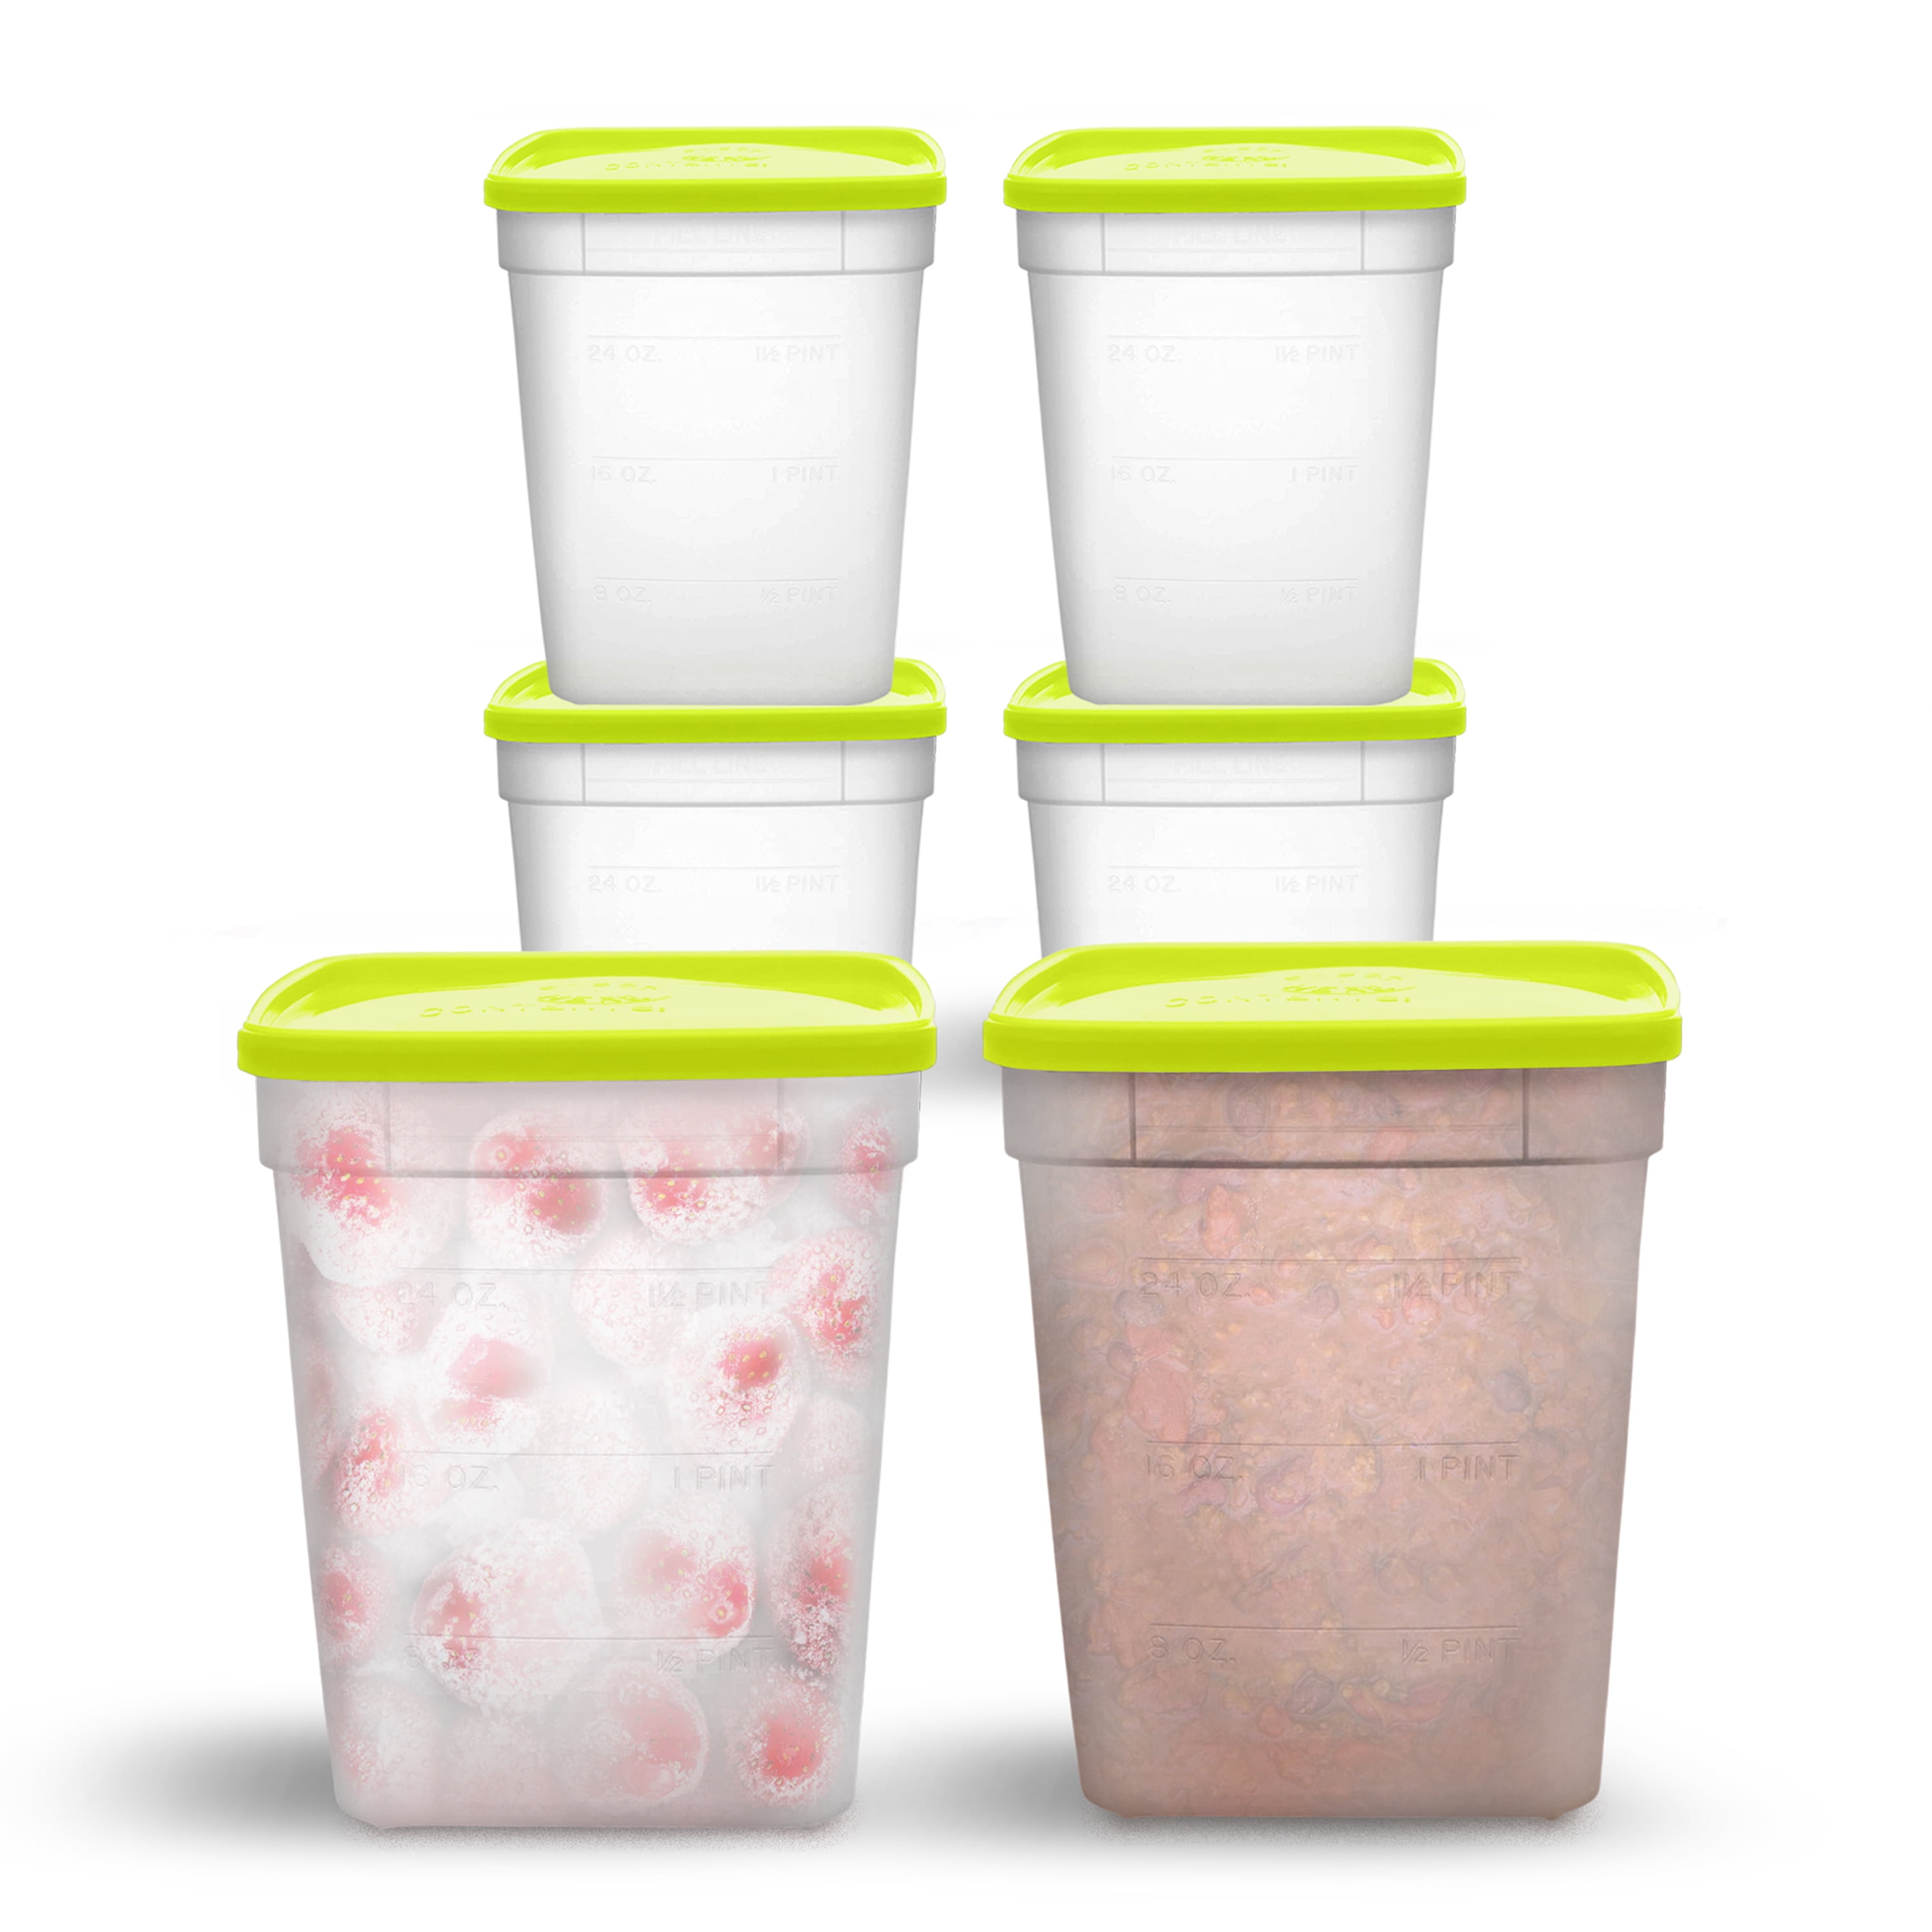 Arrow Food Storage Containers with Lids to Freeze, 1.5 Pint, 3 Cups, 8 Pack